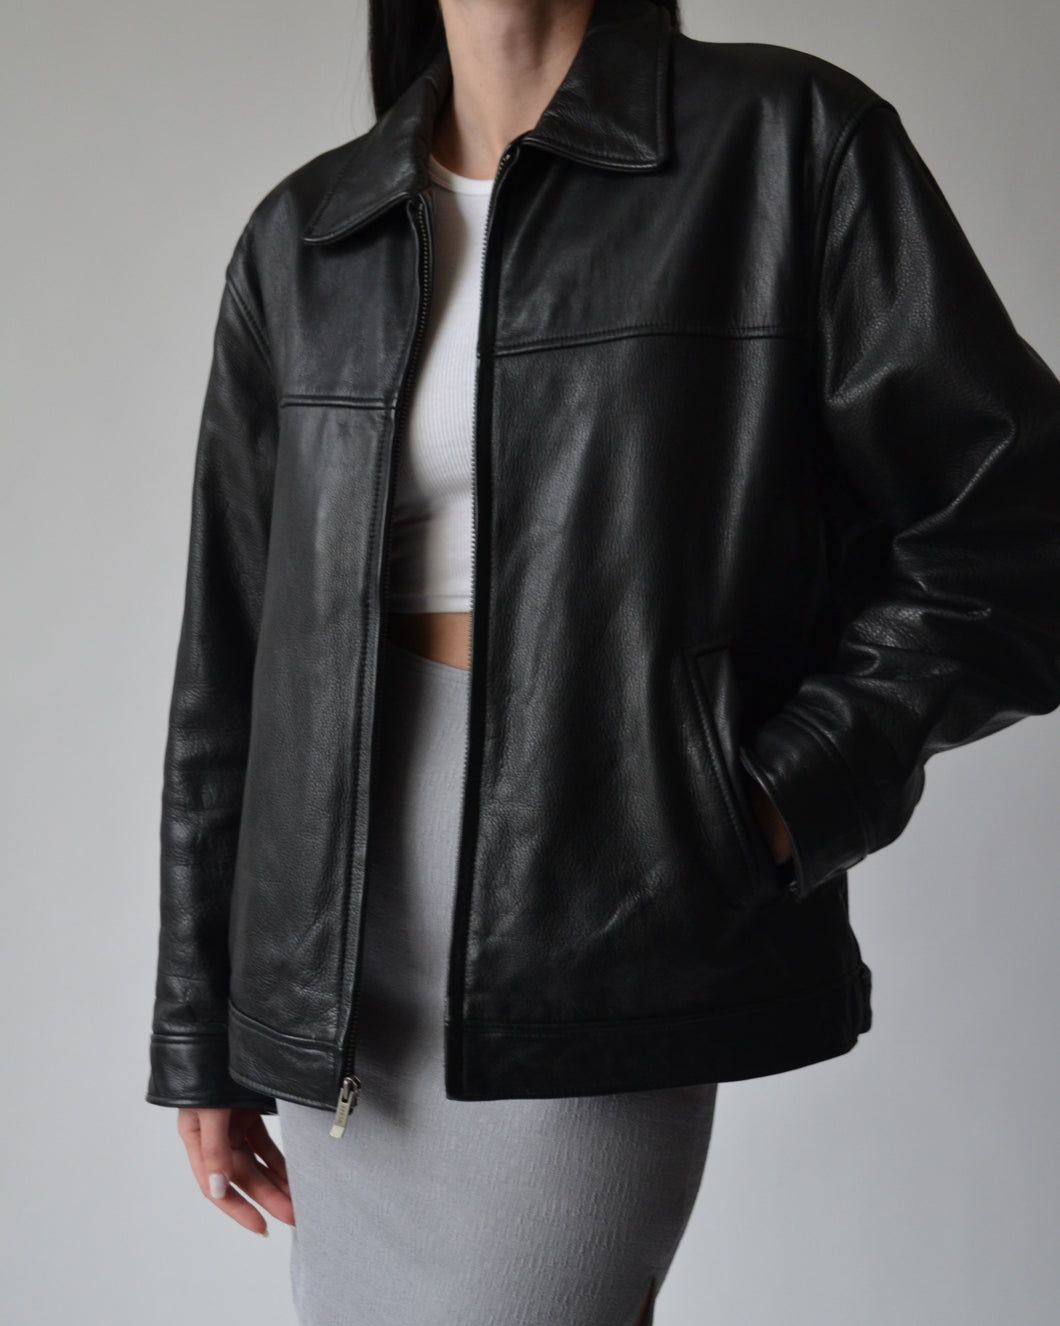 Guess Black Leather Jacket